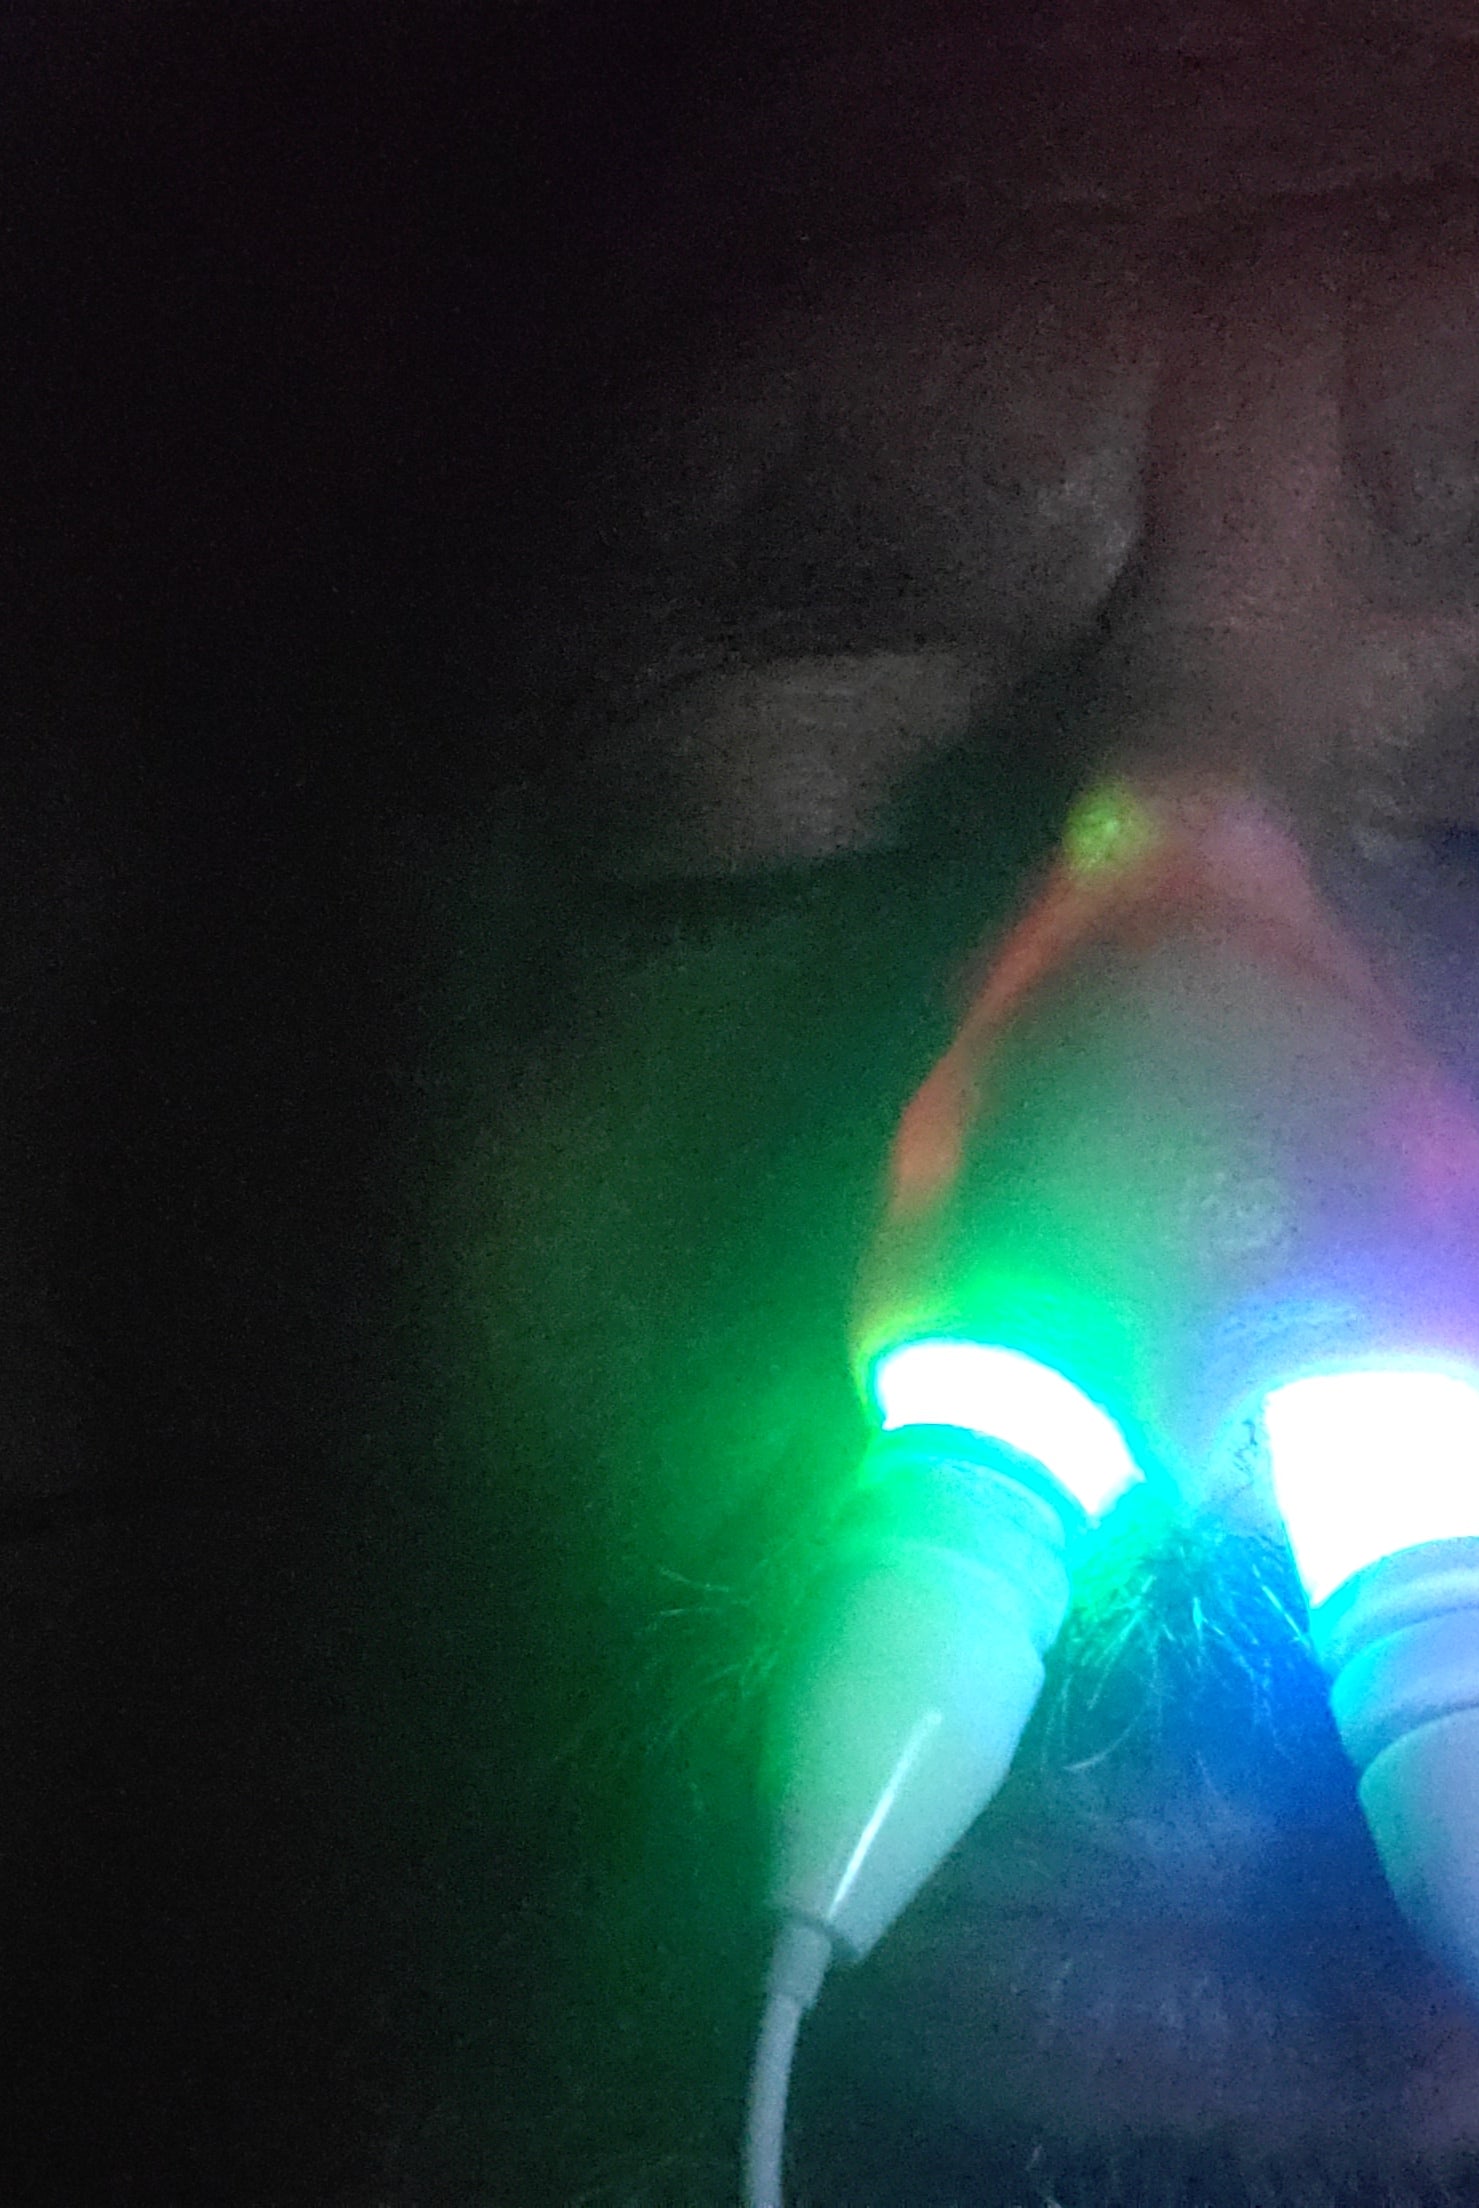 Man with a beard using the green and blue colored Nose Light Device before bed